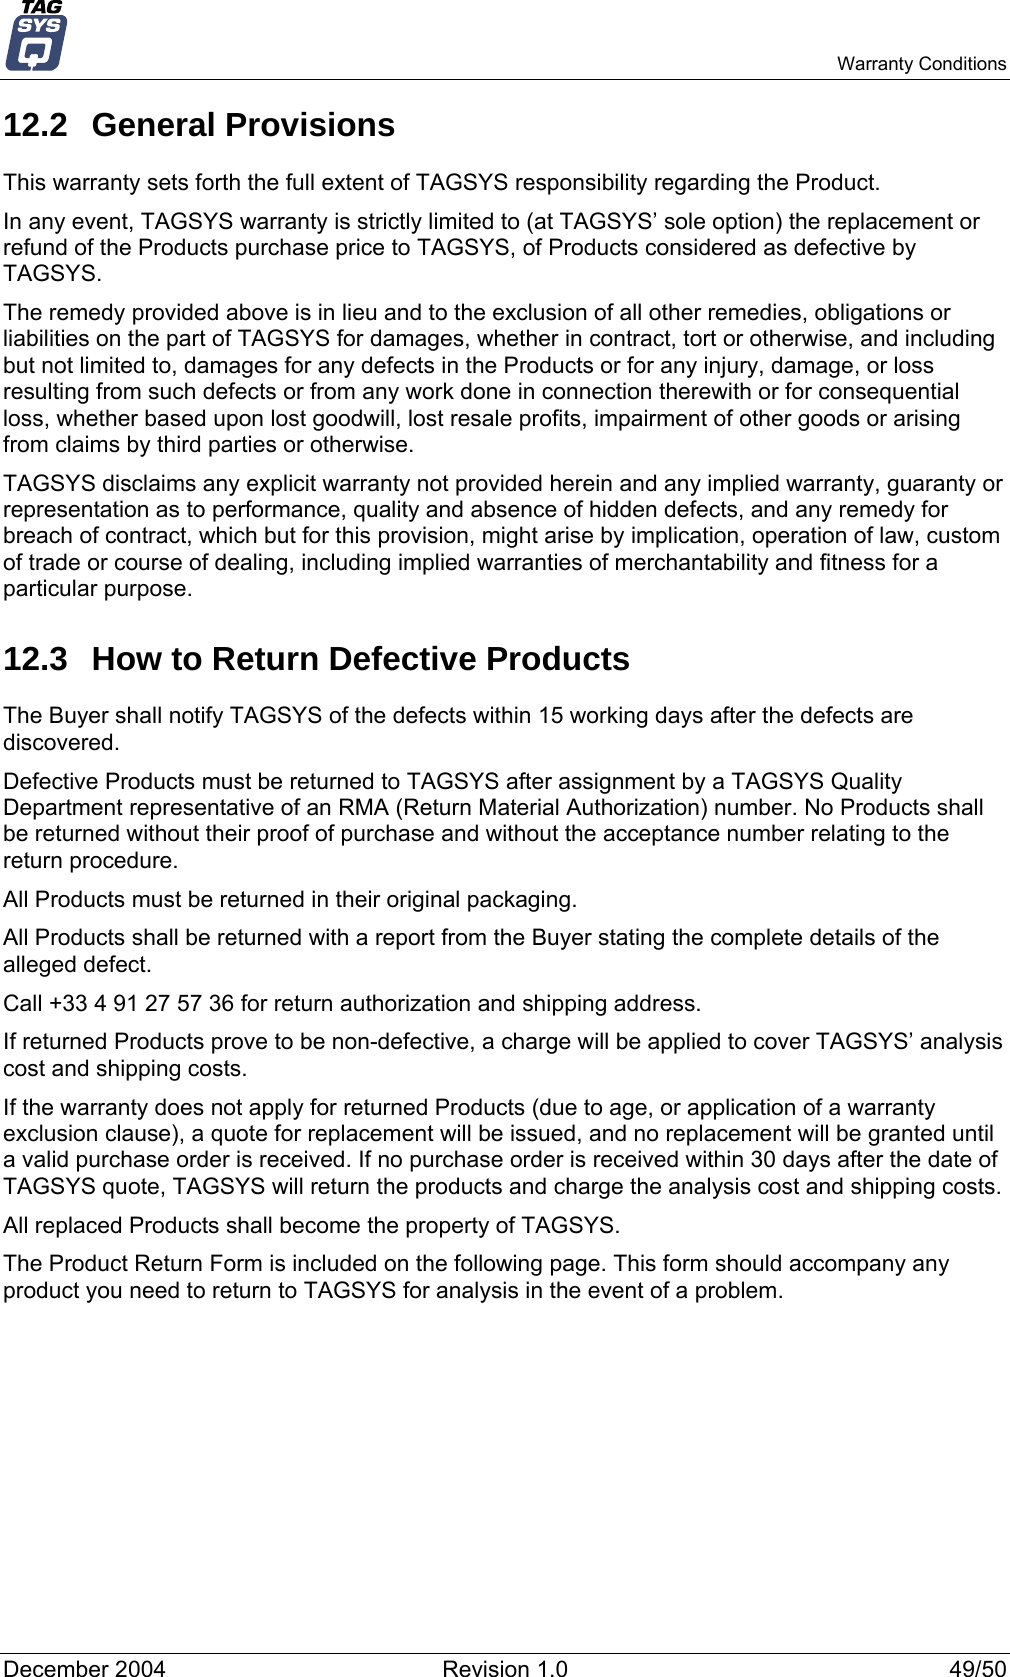   Warranty Conditions 12.2 General Provisions This warranty sets forth the full extent of TAGSYS responsibility regarding the Product. In any event, TAGSYS warranty is strictly limited to (at TAGSYS’ sole option) the replacement or refund of the Products purchase price to TAGSYS, of Products considered as defective by TAGSYS. The remedy provided above is in lieu and to the exclusion of all other remedies, obligations or liabilities on the part of TAGSYS for damages, whether in contract, tort or otherwise, and including but not limited to, damages for any defects in the Products or for any injury, damage, or loss resulting from such defects or from any work done in connection therewith or for consequential loss, whether based upon lost goodwill, lost resale profits, impairment of other goods or arising from claims by third parties or otherwise. TAGSYS disclaims any explicit warranty not provided herein and any implied warranty, guaranty or representation as to performance, quality and absence of hidden defects, and any remedy for breach of contract, which but for this provision, might arise by implication, operation of law, custom of trade or course of dealing, including implied warranties of merchantability and fitness for a particular purpose. 12.3  How to Return Defective Products The Buyer shall notify TAGSYS of the defects within 15 working days after the defects are discovered. Defective Products must be returned to TAGSYS after assignment by a TAGSYS Quality Department representative of an RMA (Return Material Authorization) number. No Products shall be returned without their proof of purchase and without the acceptance number relating to the return procedure. All Products must be returned in their original packaging. All Products shall be returned with a report from the Buyer stating the complete details of the alleged defect. Call +33 4 91 27 57 36 for return authorization and shipping address. If returned Products prove to be non-defective, a charge will be applied to cover TAGSYS’ analysis cost and shipping costs. If the warranty does not apply for returned Products (due to age, or application of a warranty exclusion clause), a quote for replacement will be issued, and no replacement will be granted until a valid purchase order is received. If no purchase order is received within 30 days after the date of TAGSYS quote, TAGSYS will return the products and charge the analysis cost and shipping costs. All replaced Products shall become the property of TAGSYS. The Product Return Form is included on the following page. This form should accompany any product you need to return to TAGSYS for analysis in the event of a problem. December 2004  Revision 1.0  49/50 